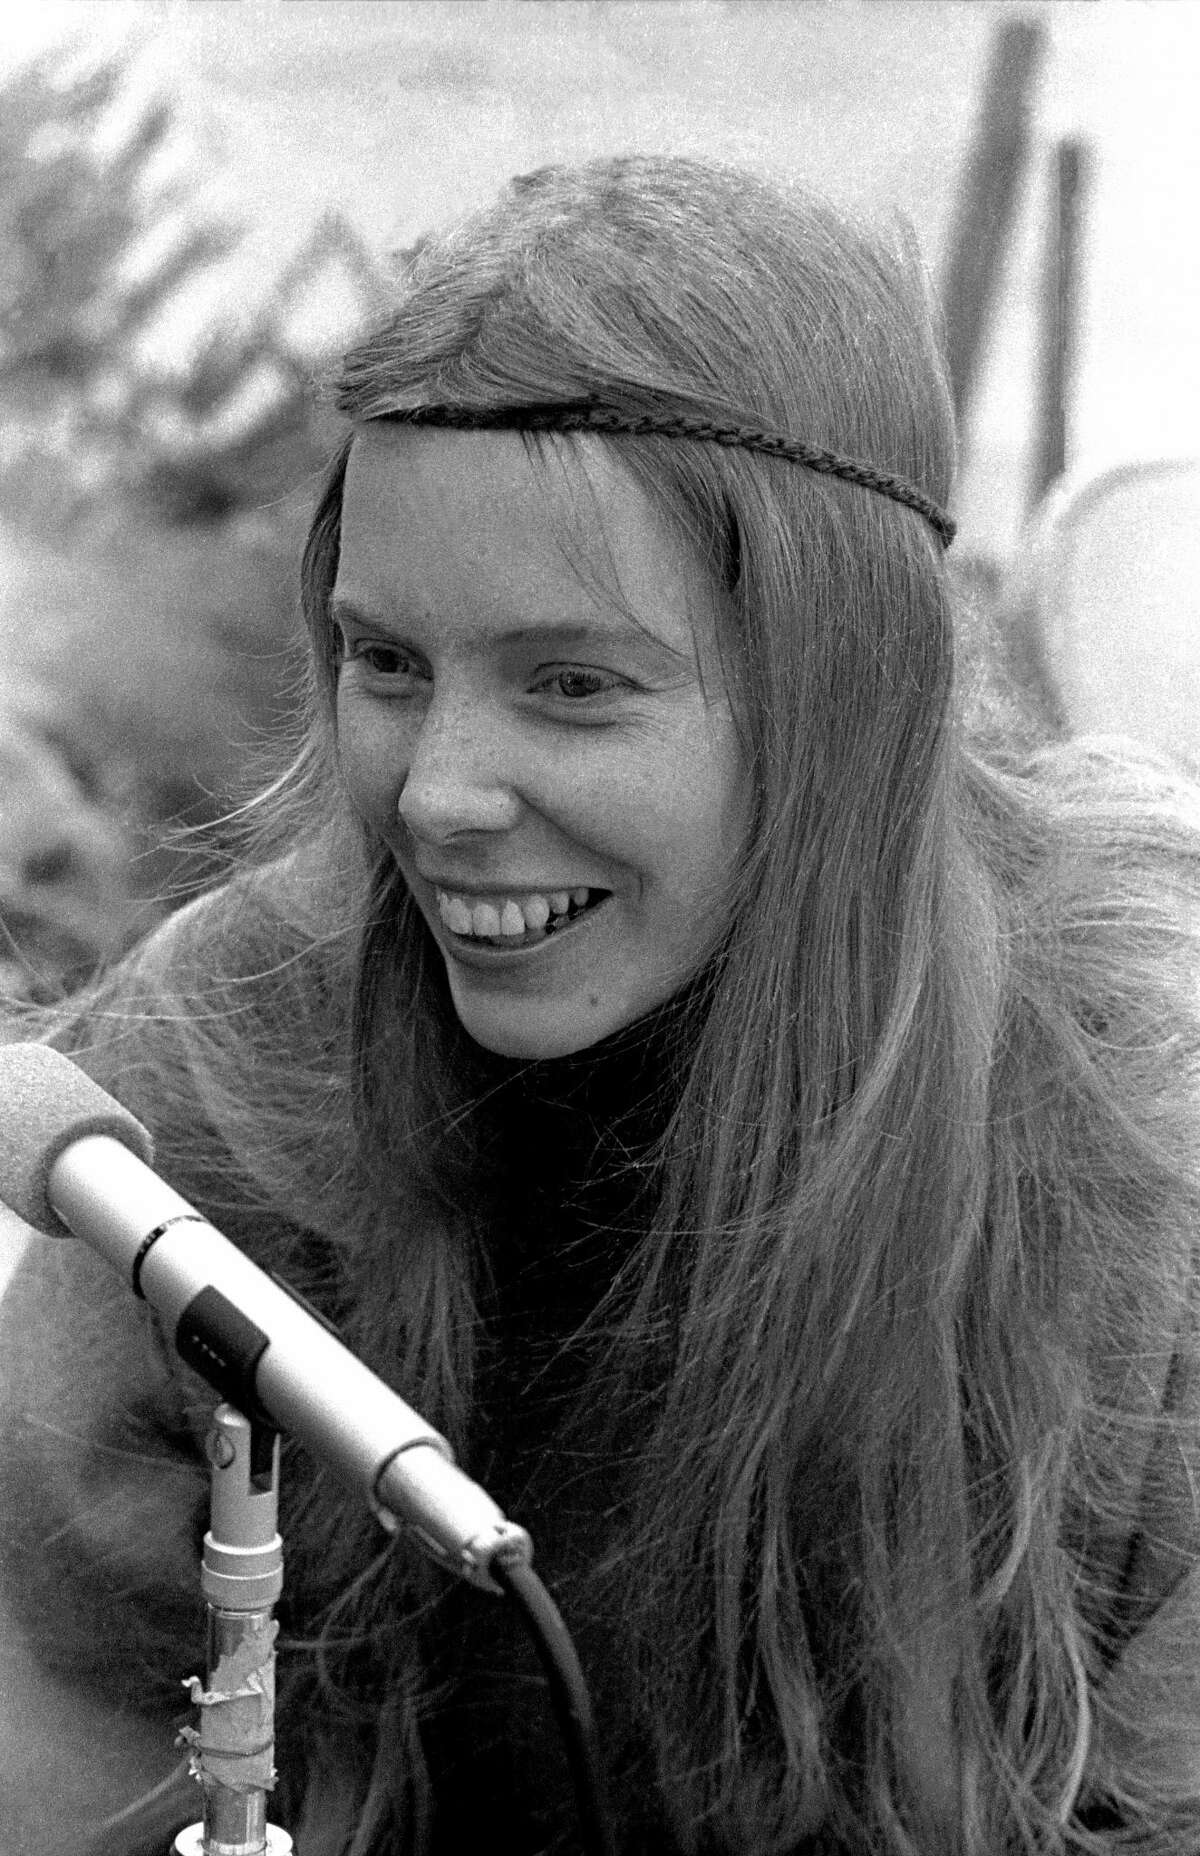 Canadian singer-songwriter Joni Mitchell poses for a portrait during the 1969 Big Sur Folk Festival on September 13-14, 1969 at the Esalen Institute in Big Sur, California.